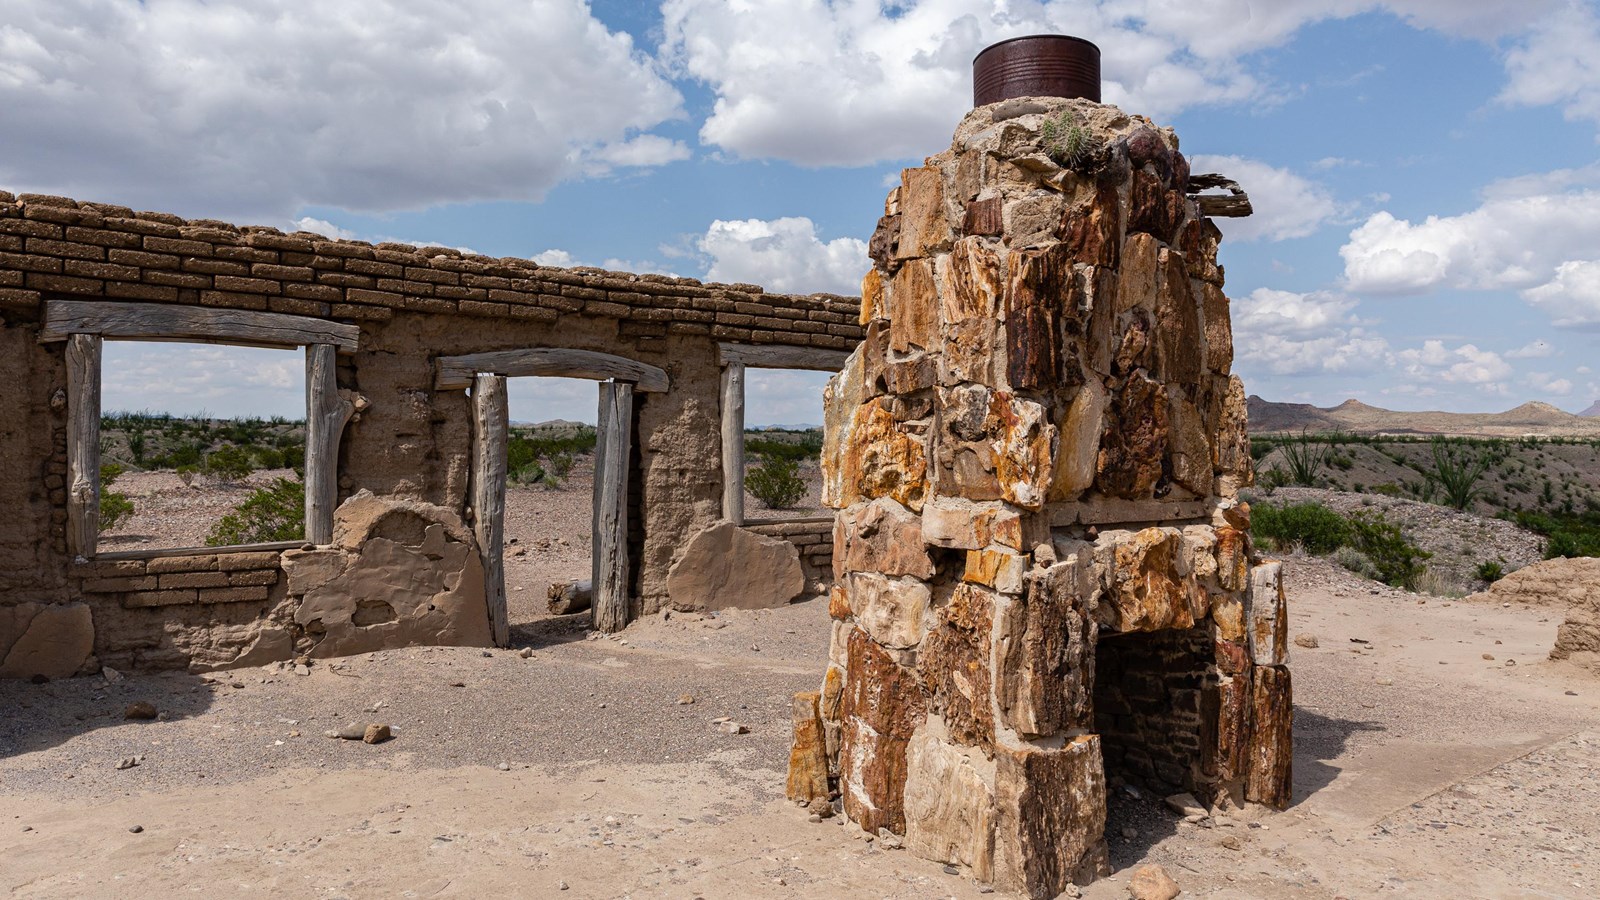 An adobe wall and a petrified wood chimney rest up on a mesa above the surrounding desert.